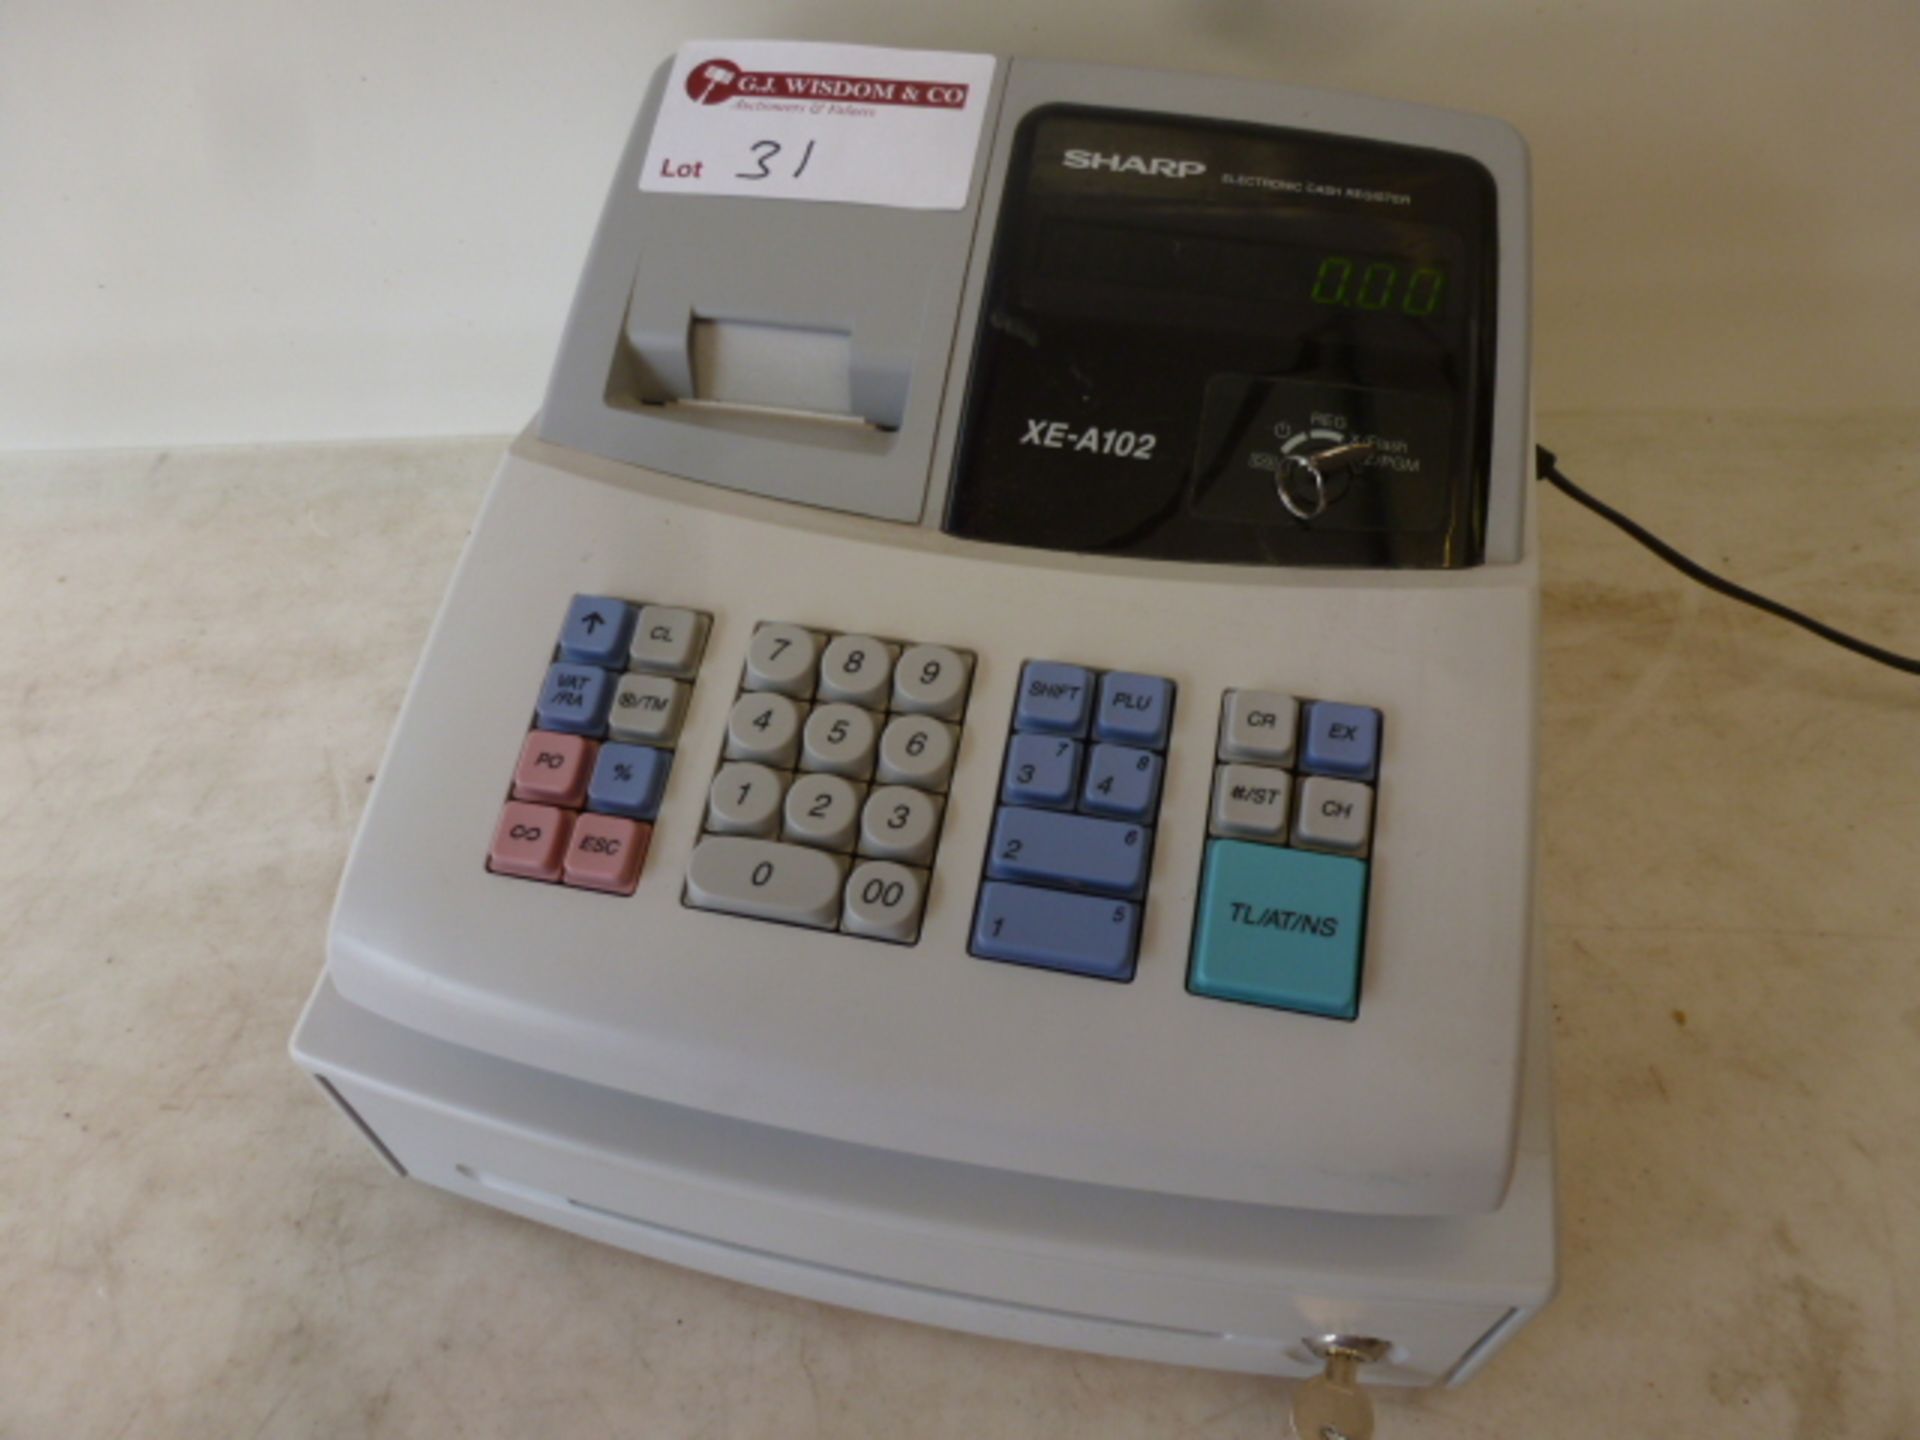 Sharp Electronic Cash Register, Model XE-A102, With Key & Cash Drawer Key